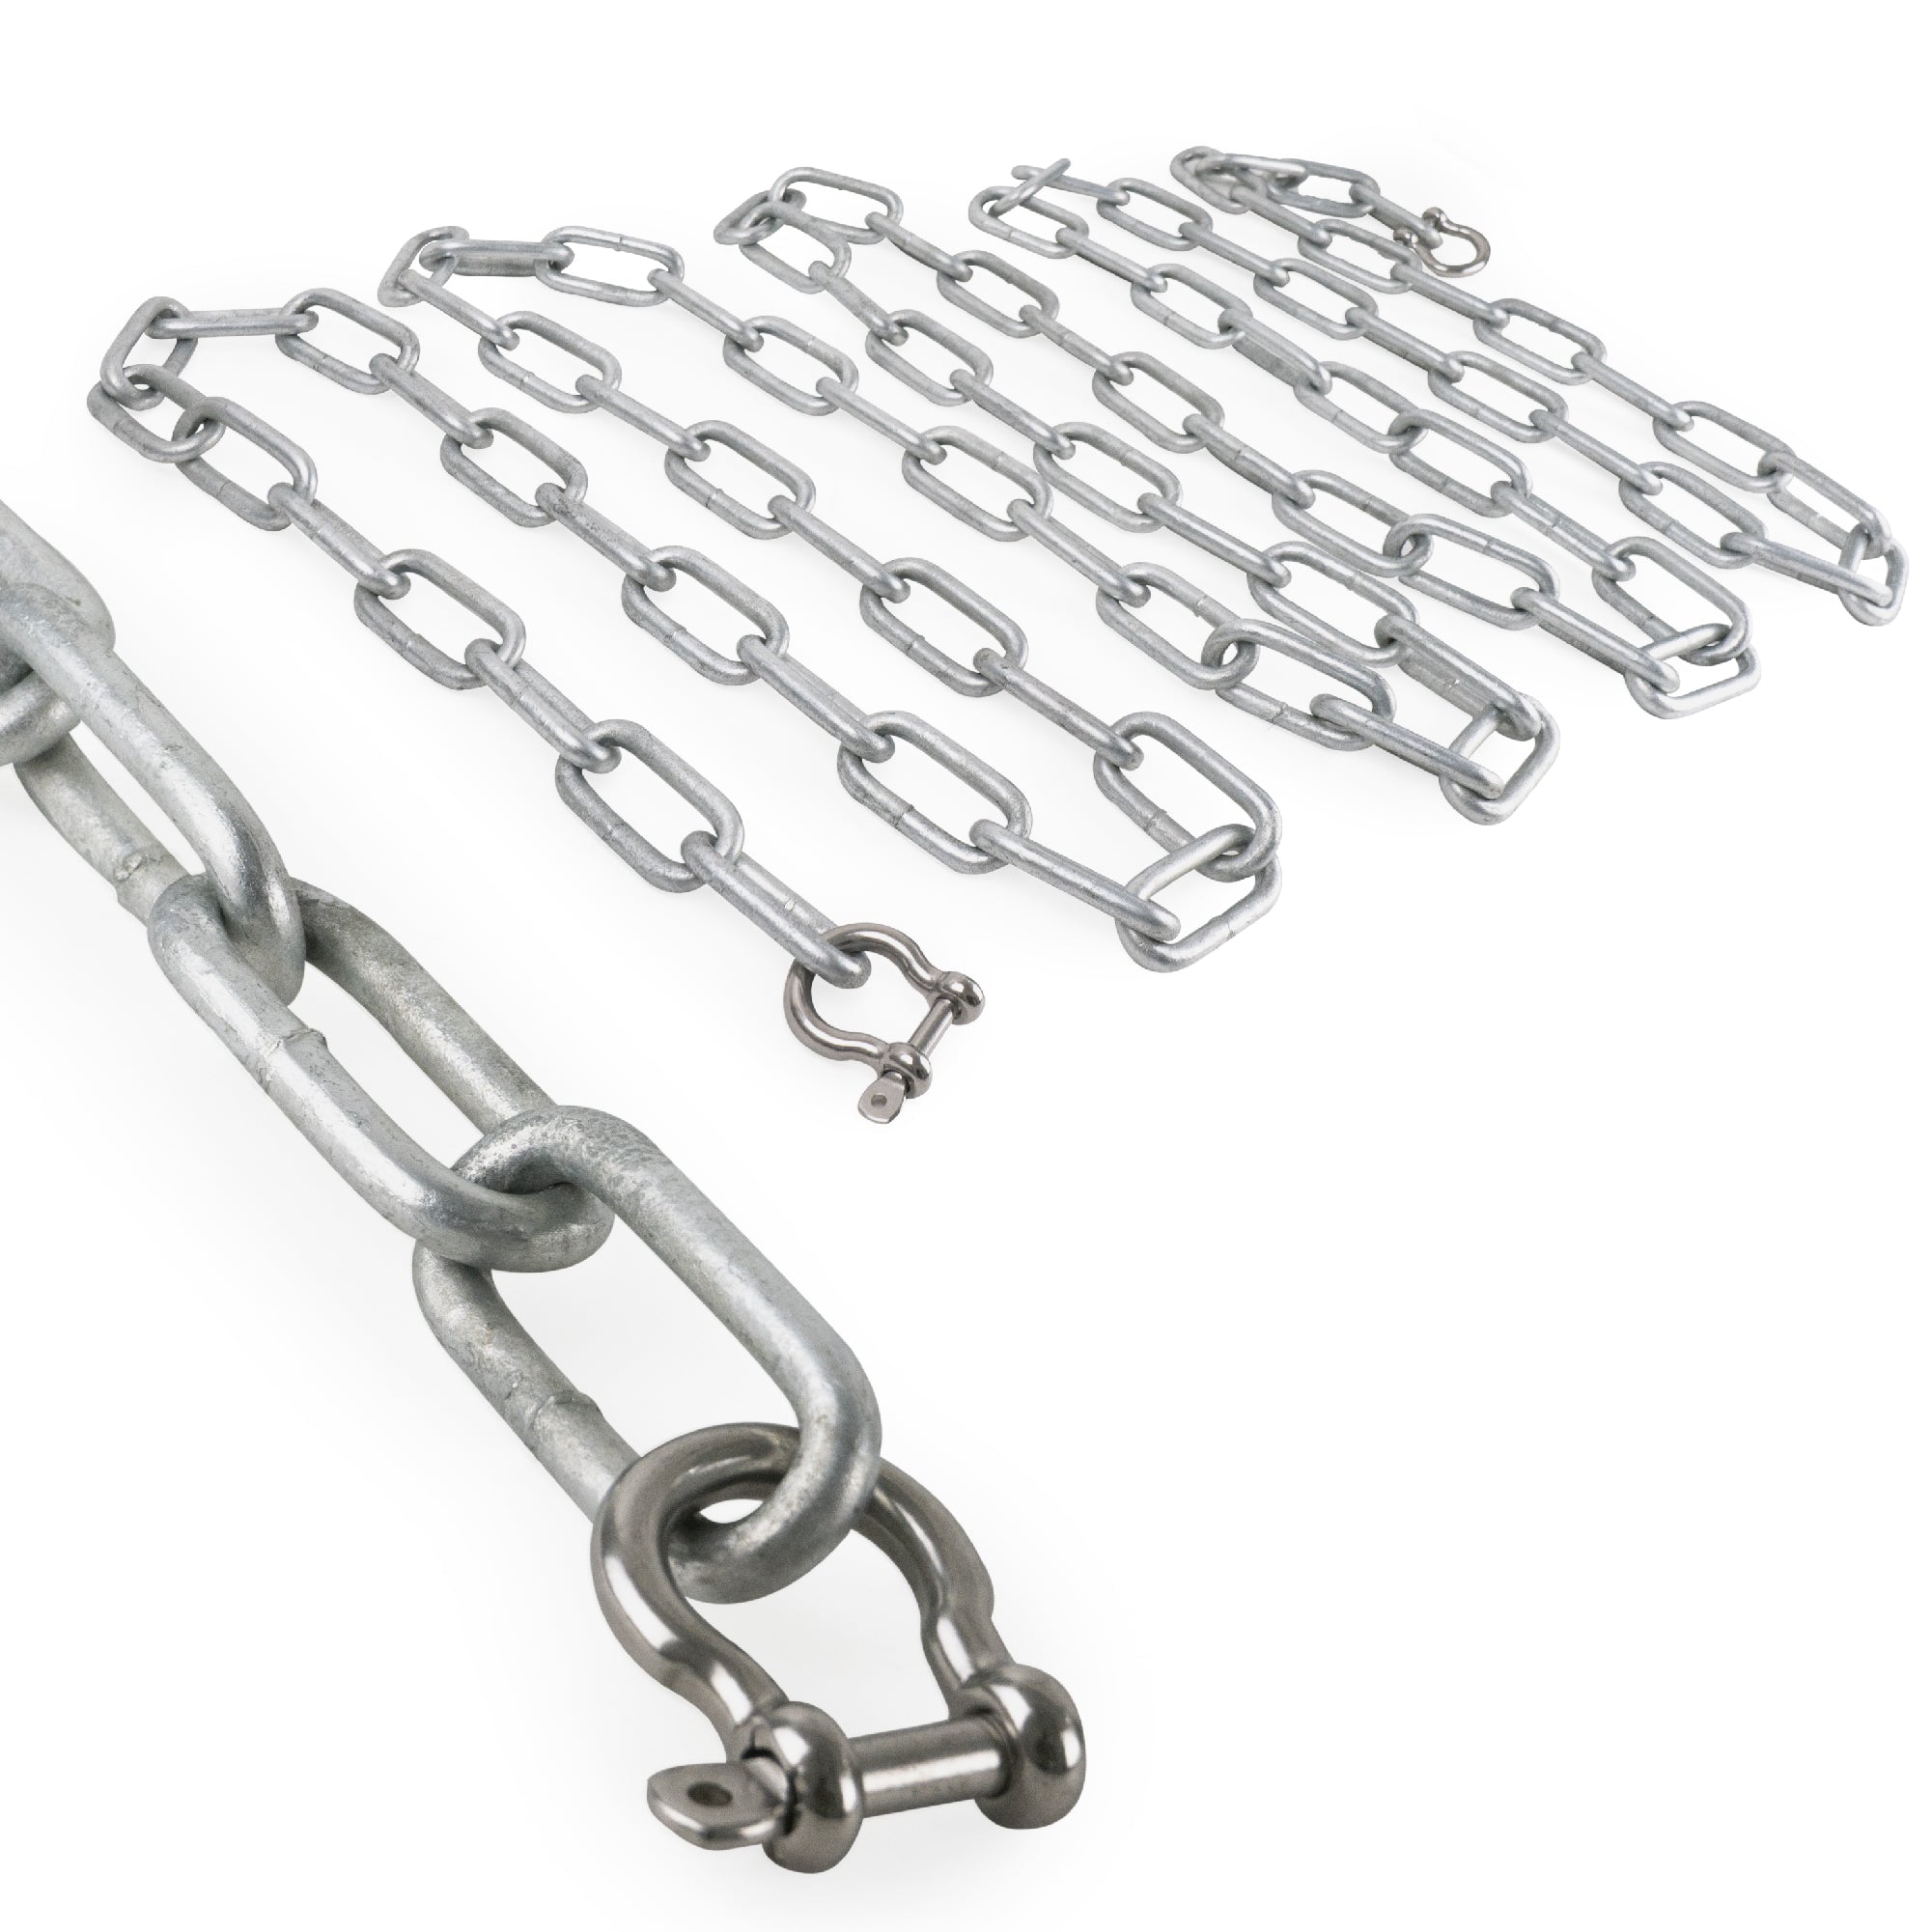 Boat Anchor Lead Chain with Shackles, 5/16 inches x 10 Feet Hot-Dipped Galvanized Steel with 2 AISI316 Stainless Steel 5/16 inches Bow Shackles FO4569-GN10